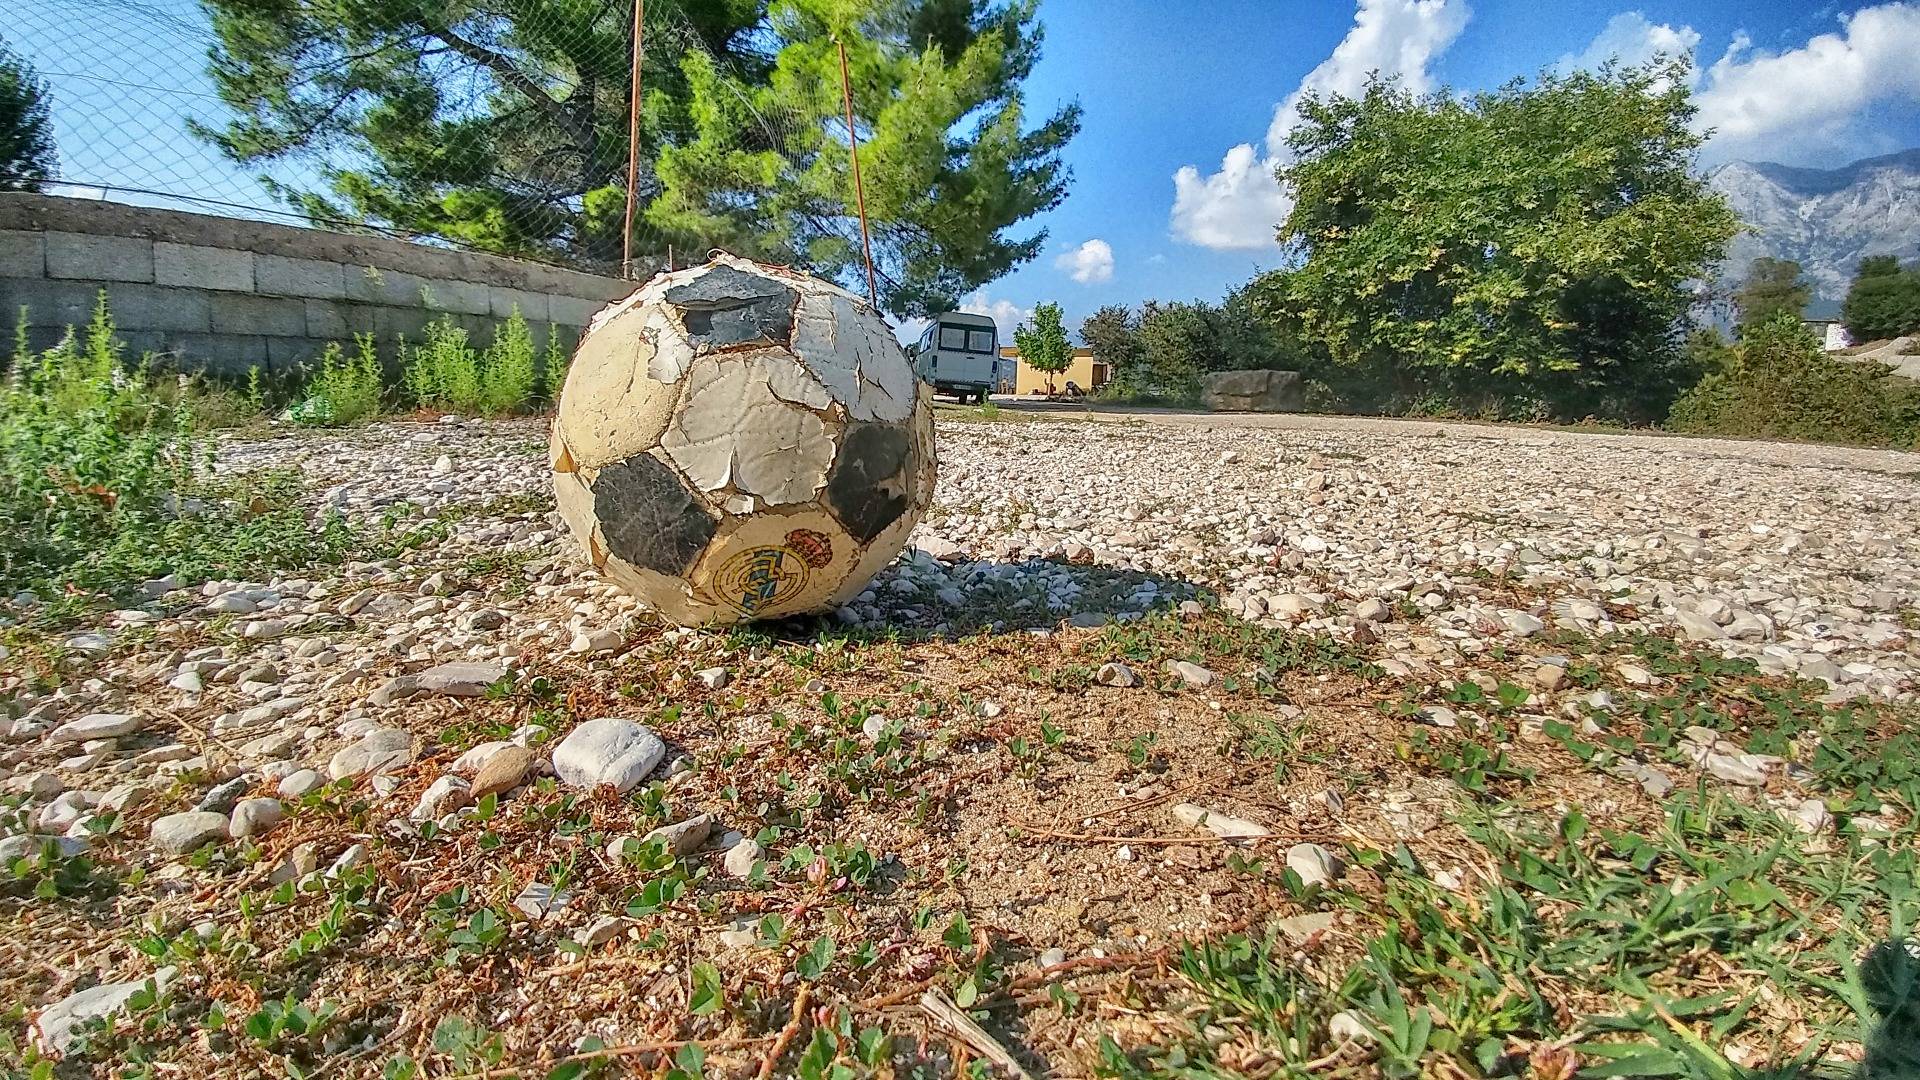 The best times are behind this ball